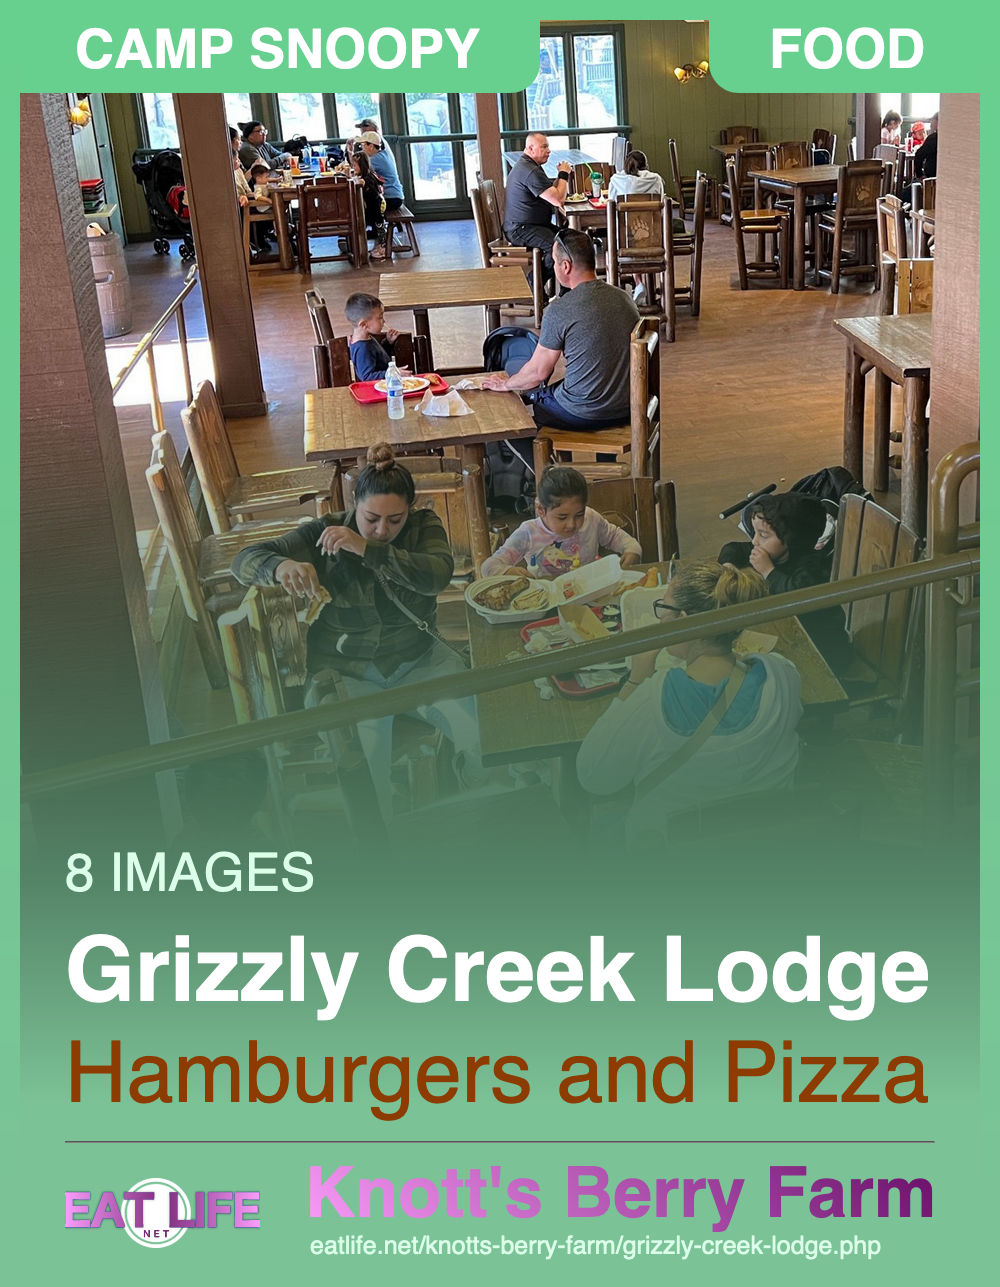 Grizzly Creek Lodge